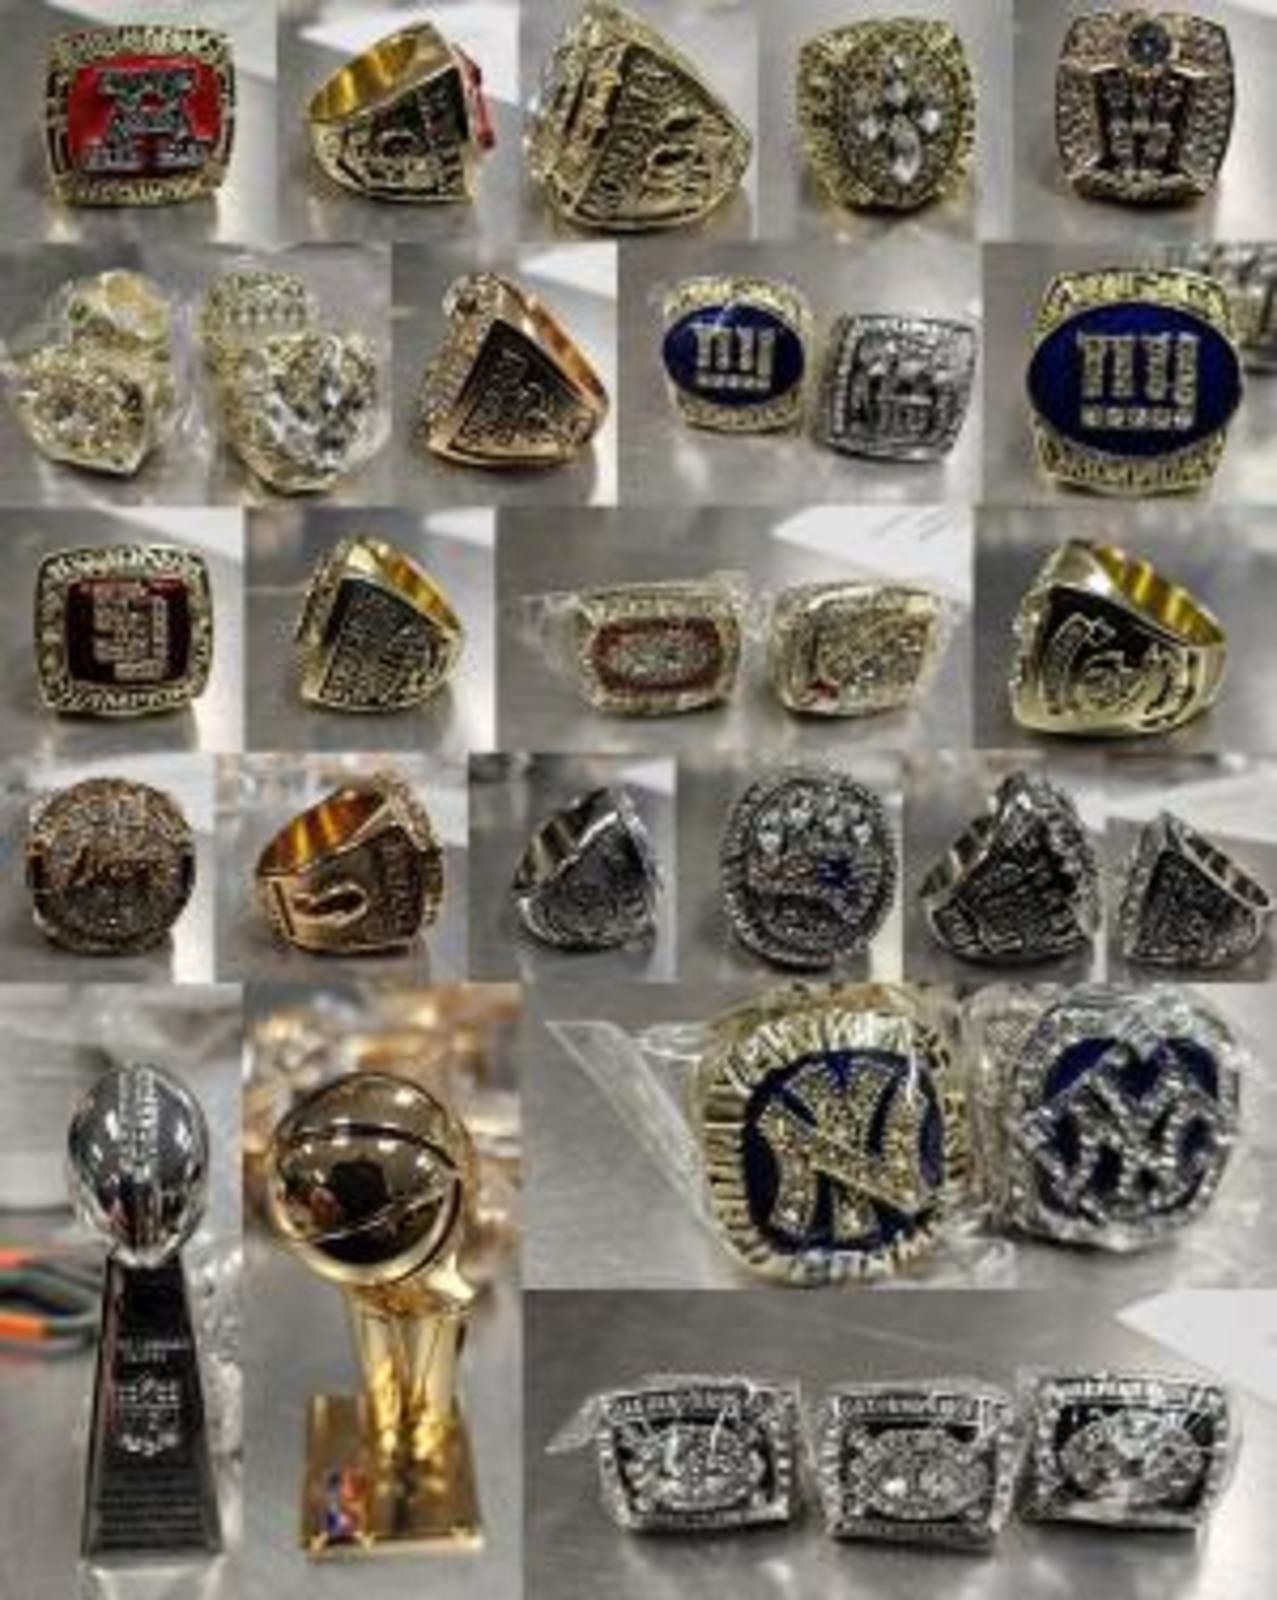 Counterfeit professional sports championship rings consisting of NFL, NBA and MLB, seized as Intellectual Property Rights violations